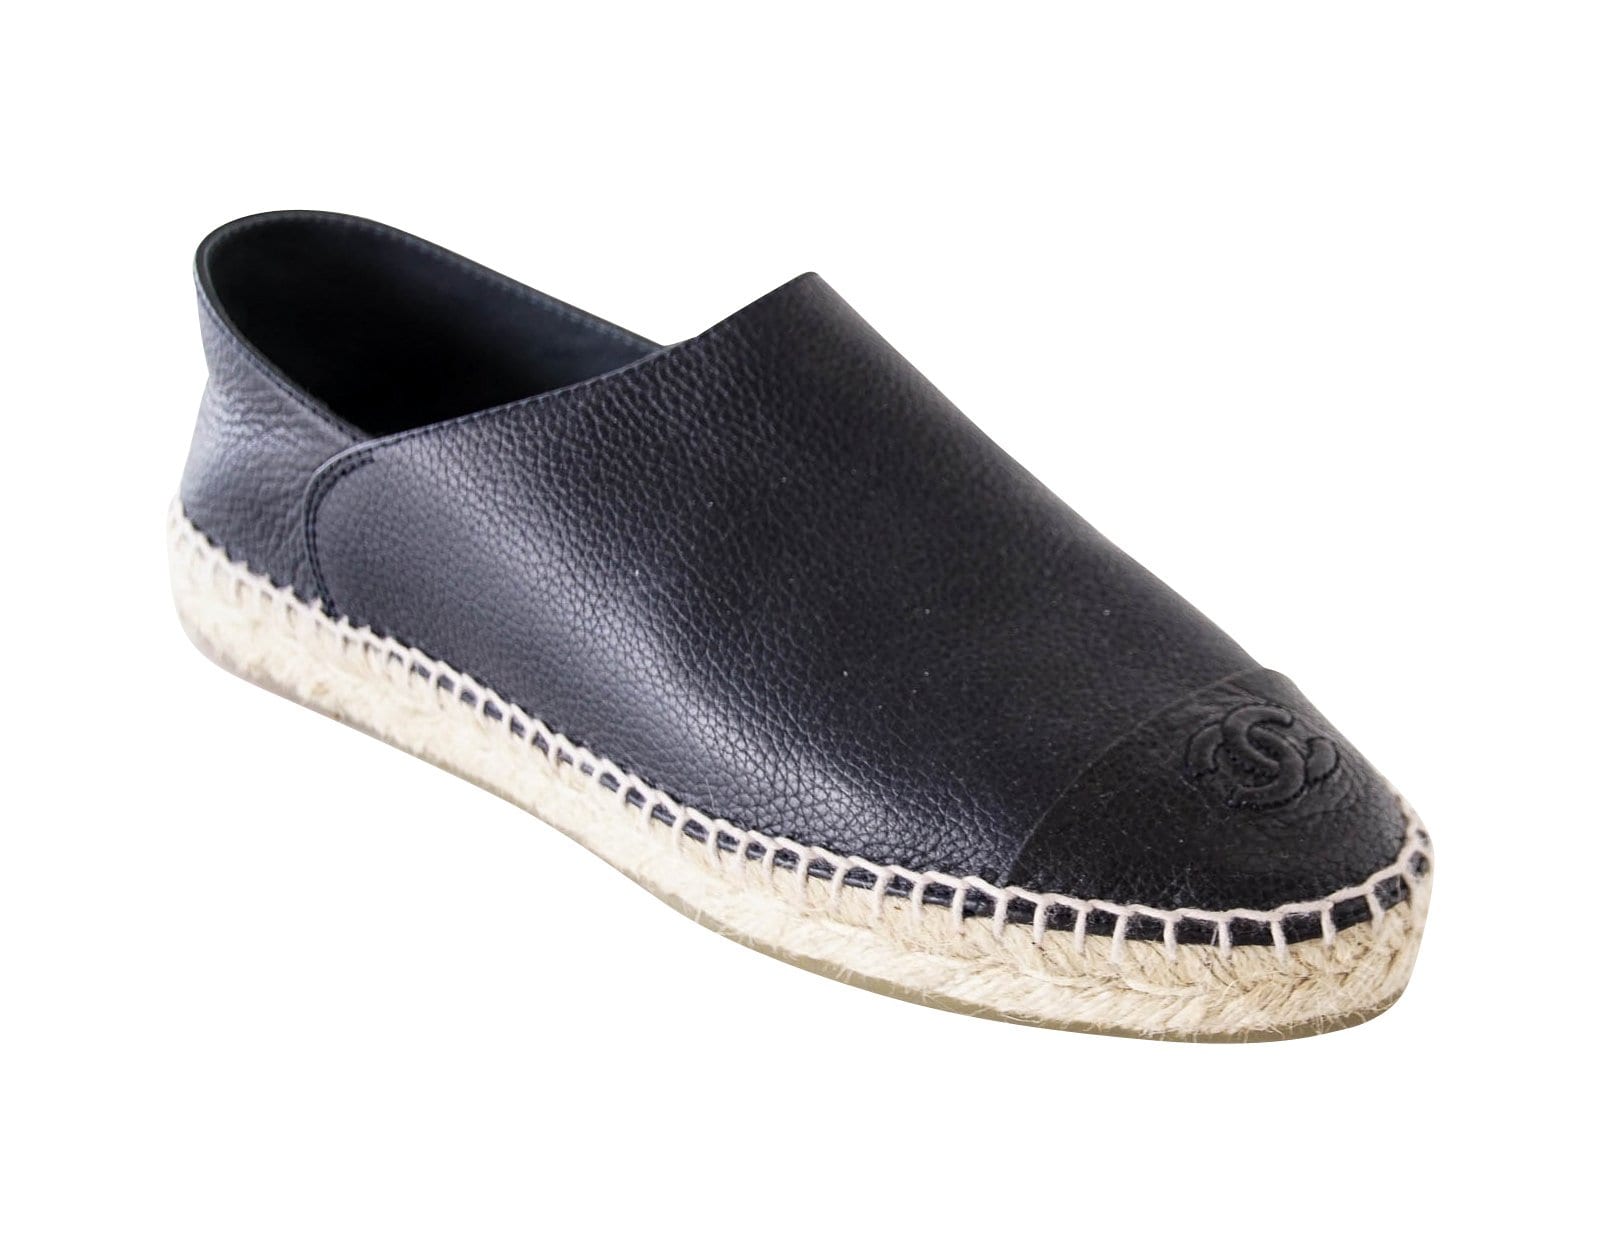 Chanel Shoe Espadrilles Cambon Loafers Dark Navy Leather 39 / 9